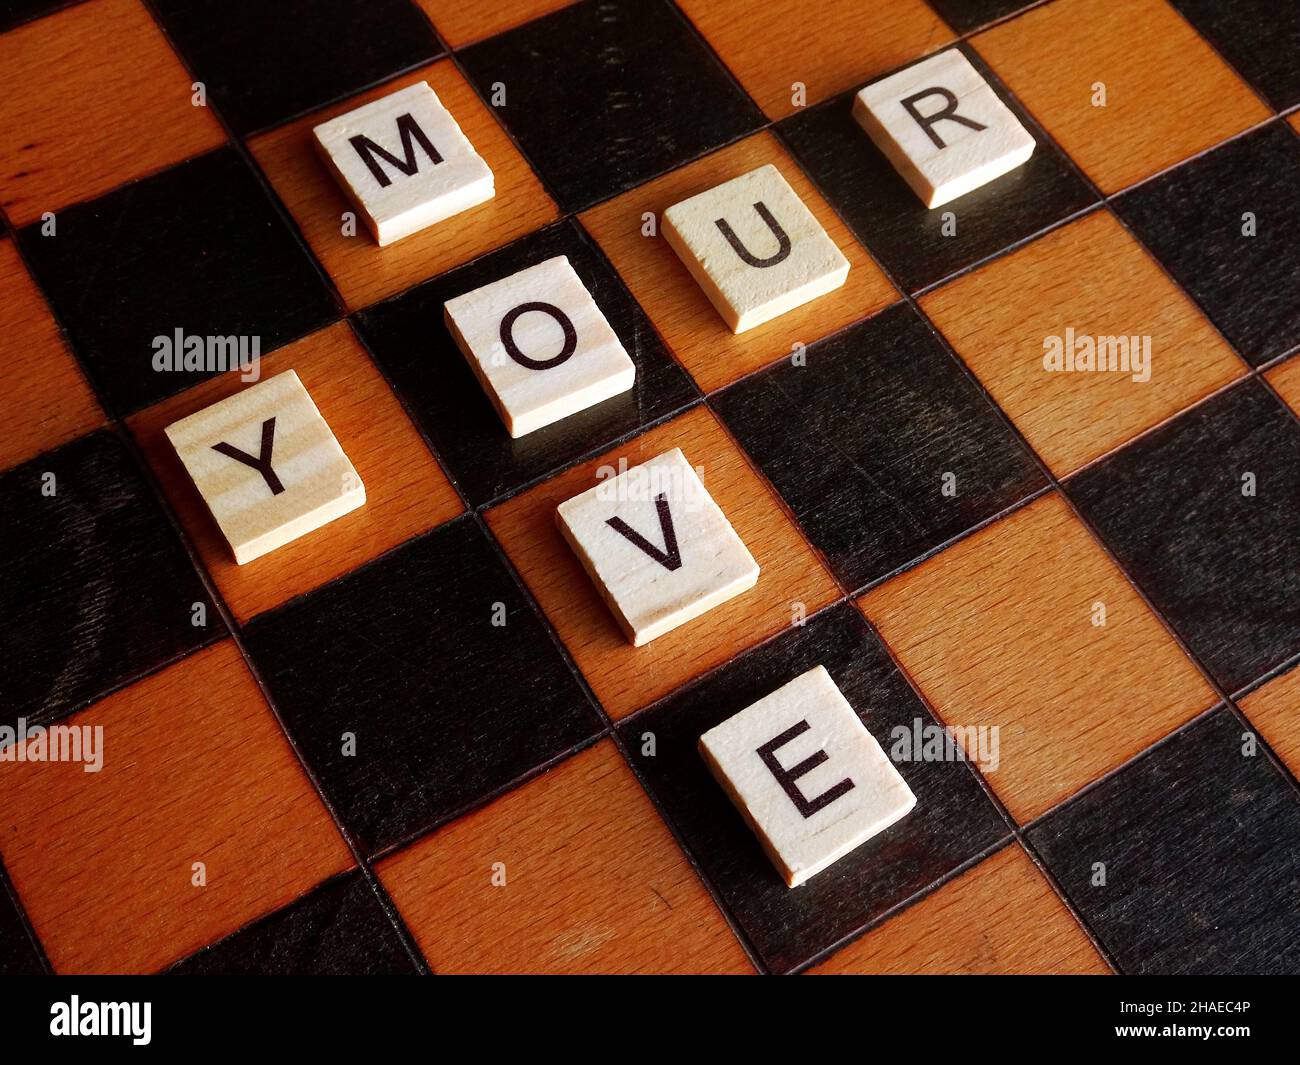 Your Move. Scrabble letters on wooden chessboard Stock Photo